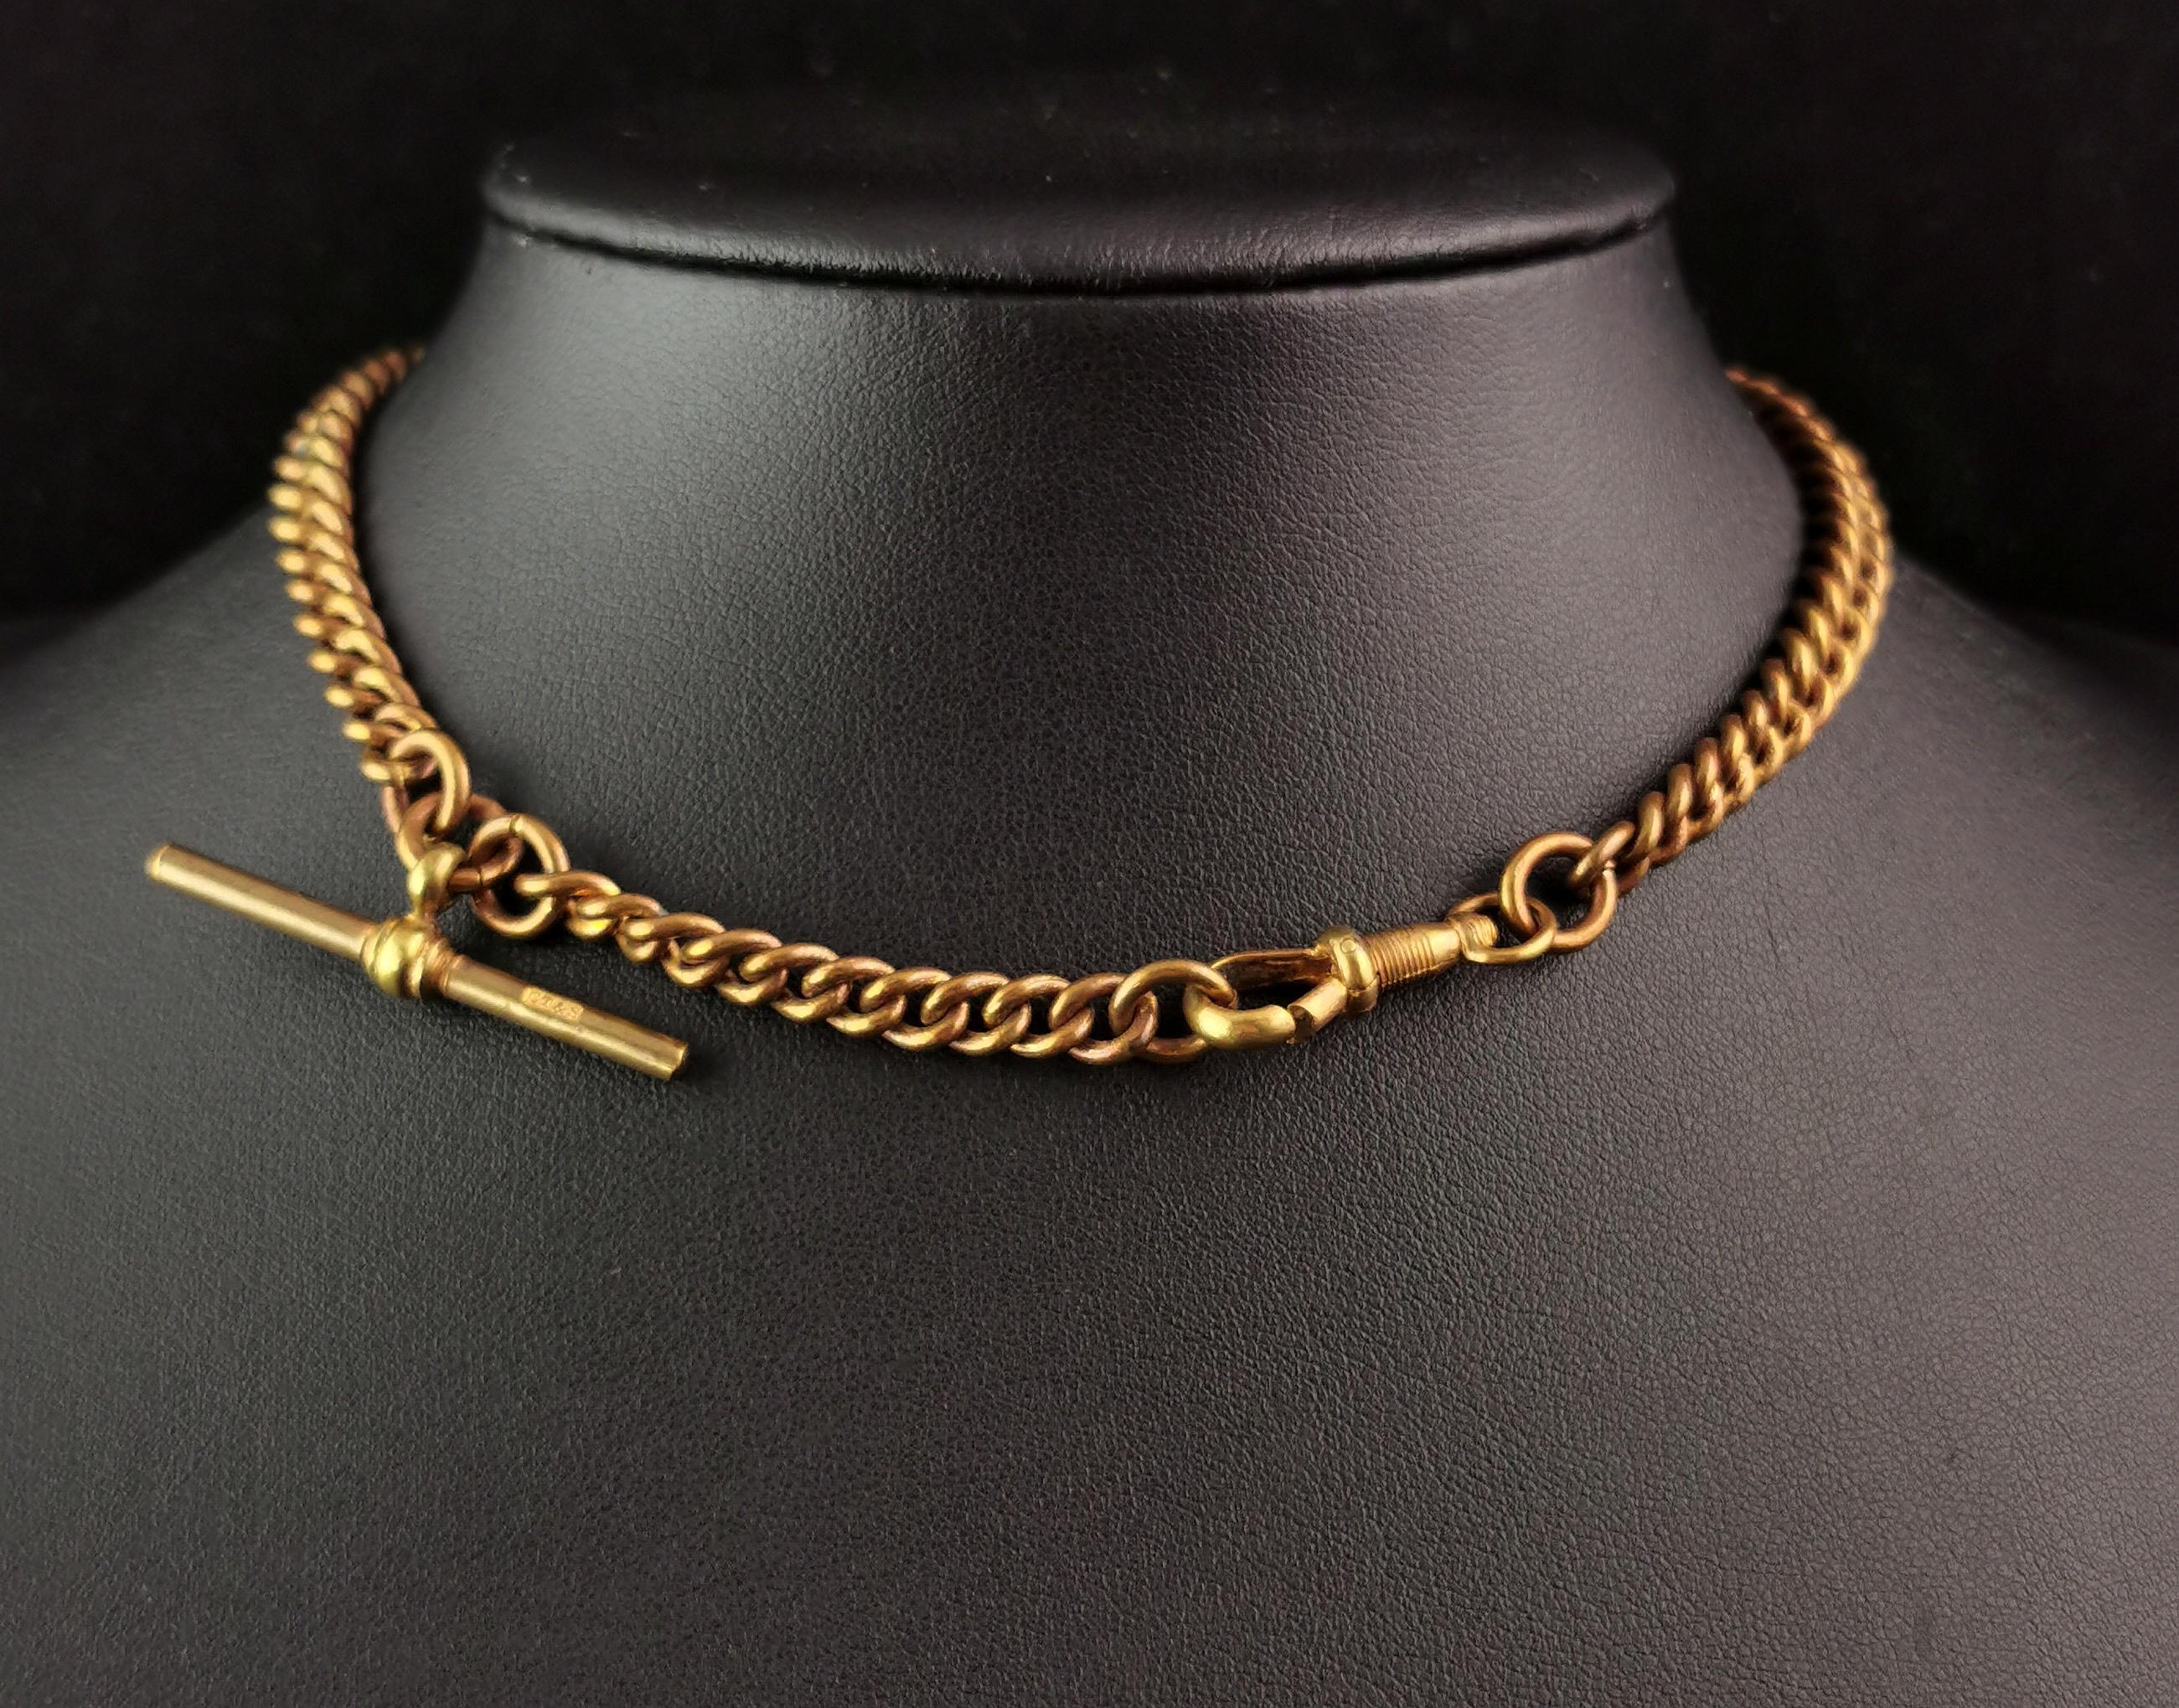 A handsome antique Victorian era gilt brass Albert chain.

A chunky curb link chain with a dog clip fastener and a t bar.

It is a golden gilt wash over brass and is a nice solid piece.

Perfect for holding your favourite antique pocket watch or fob